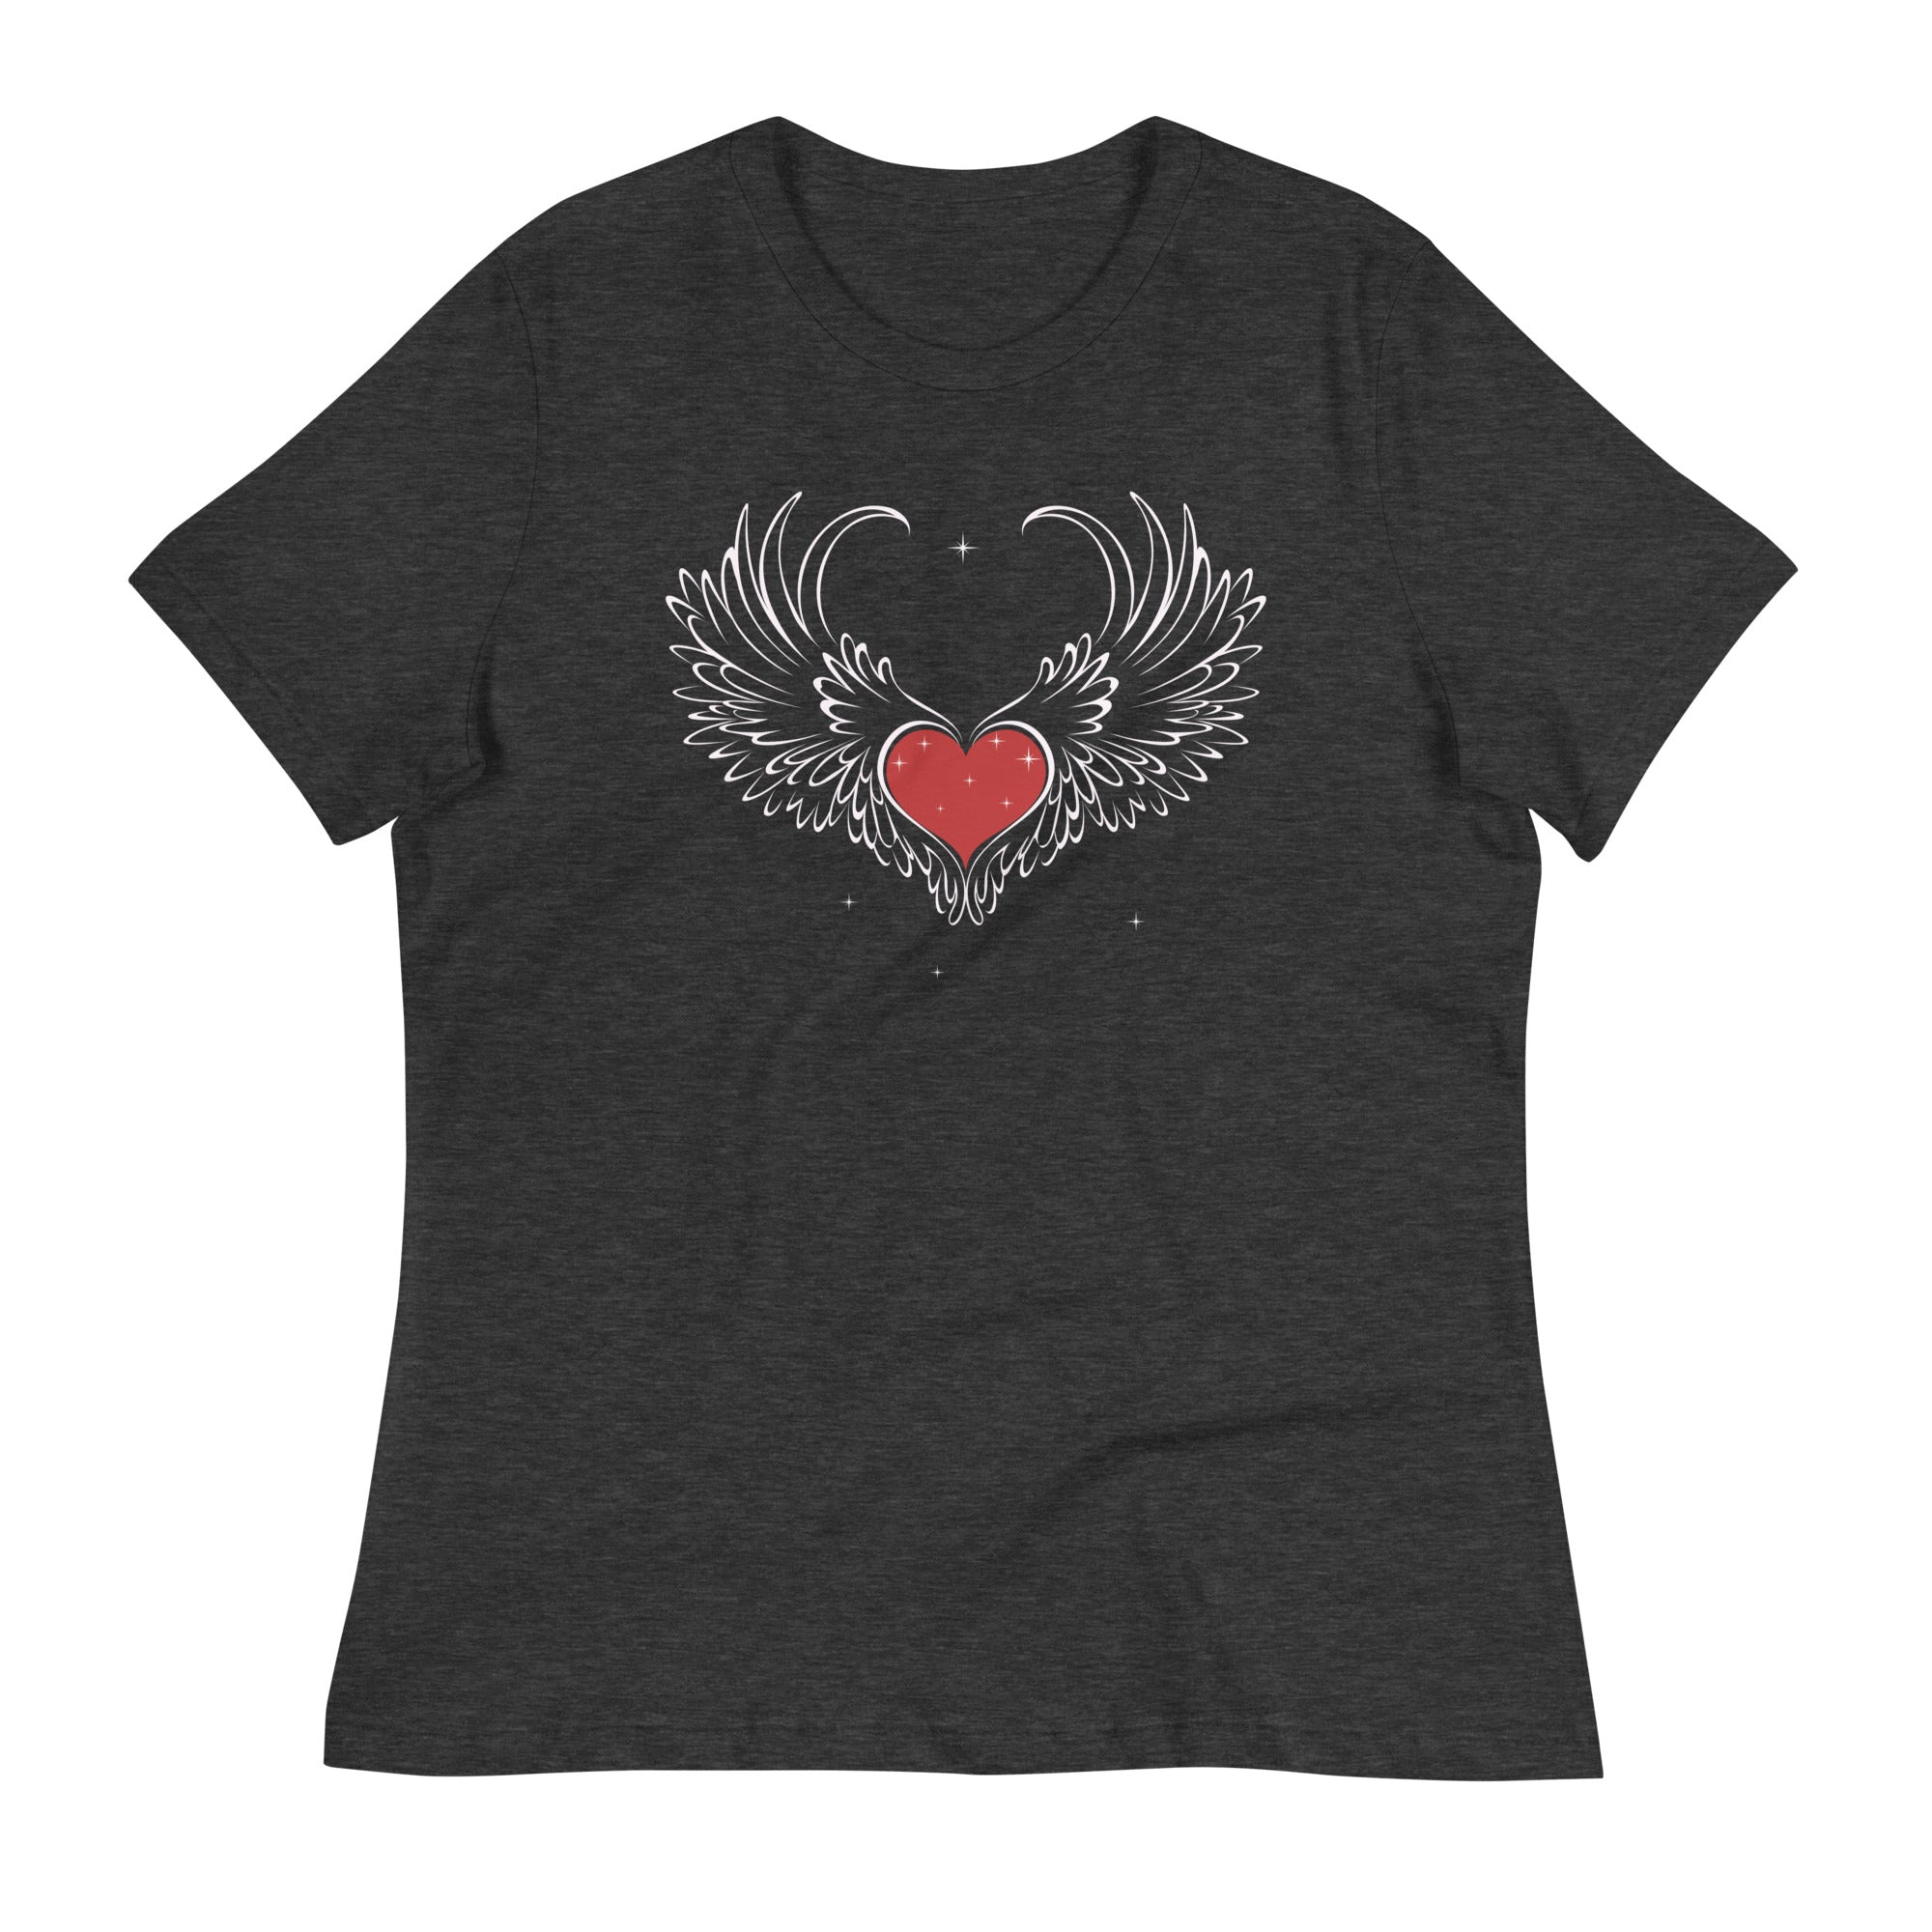 Heart with wings love t-shirt for women, lioness-love